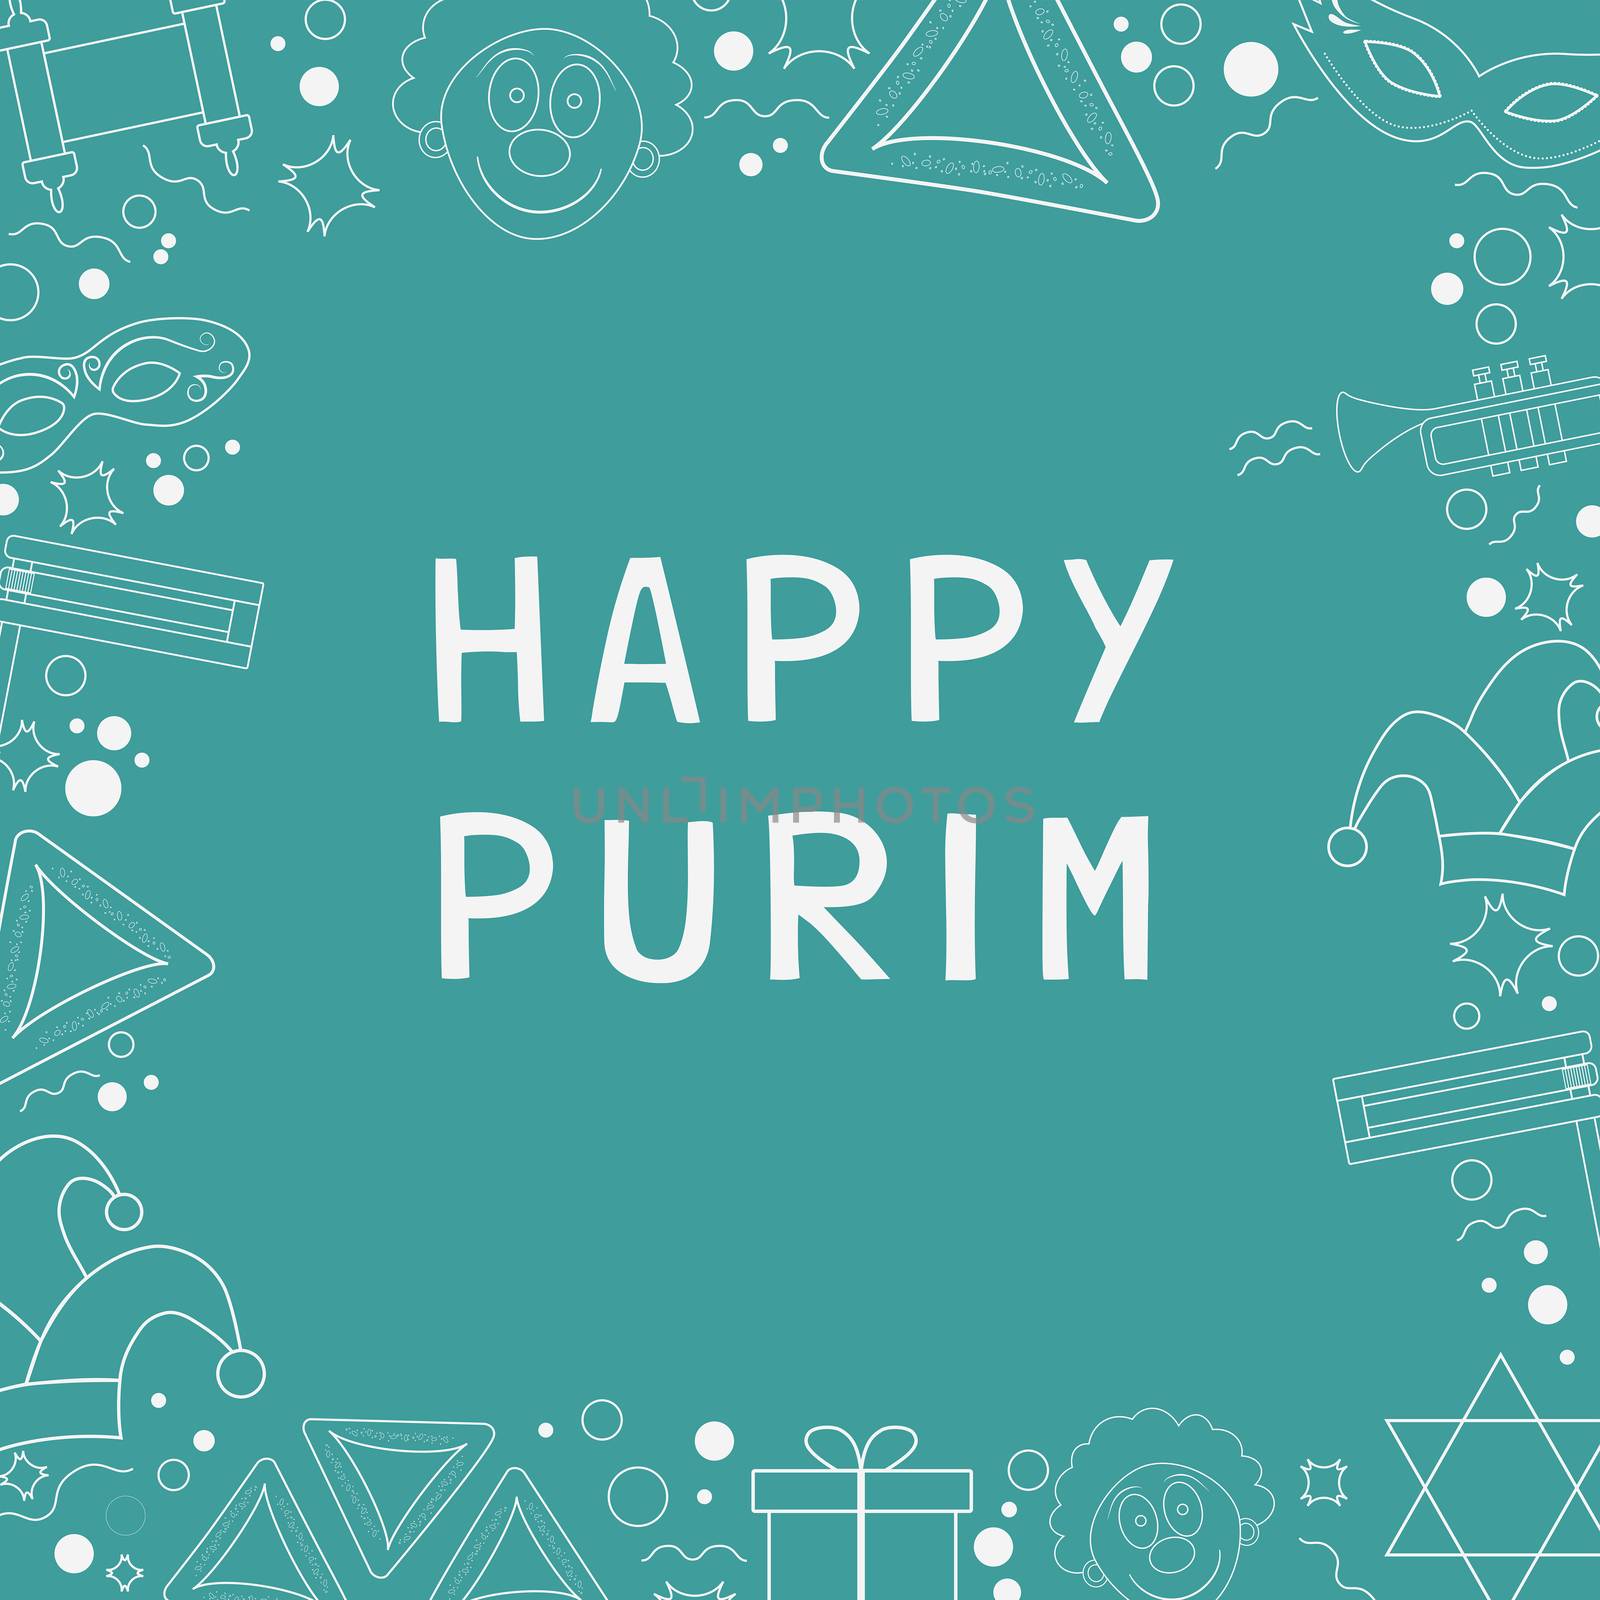 Frame with purim holiday flat design white thin line icons with text in english "Happy Purim". Template with space for text, isolated on background. Vector eps10 illustration.